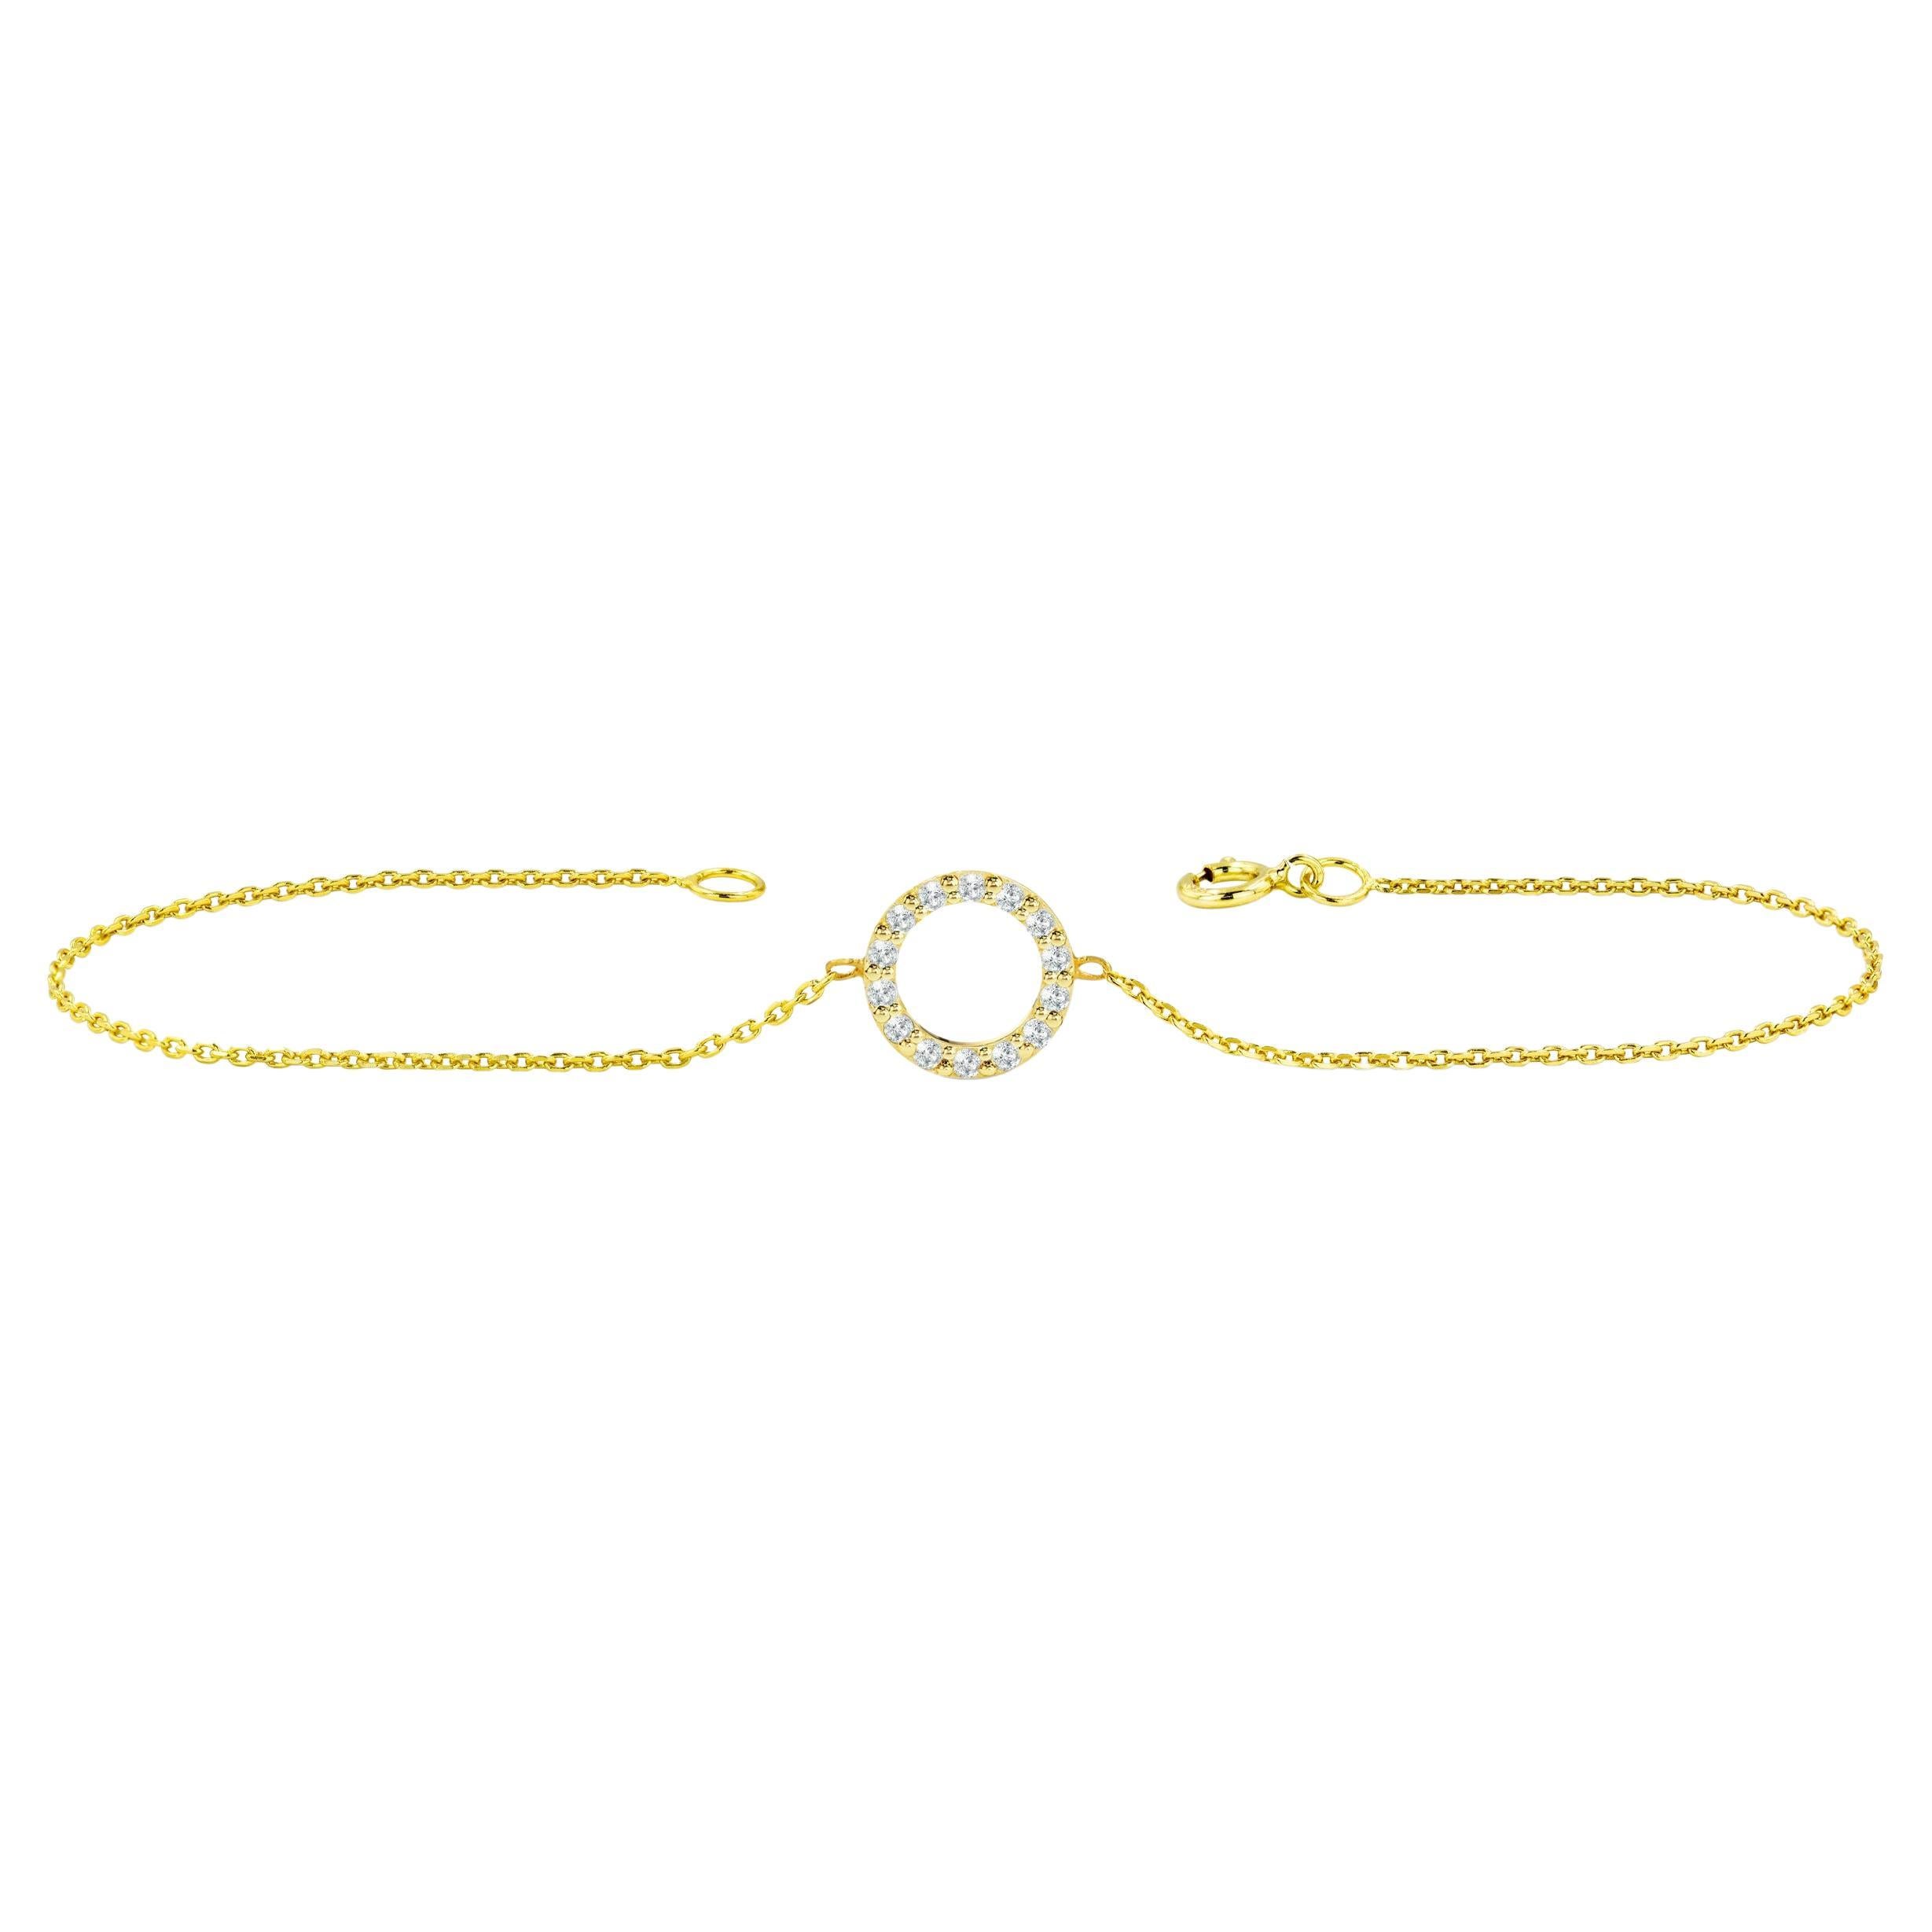 Diamond Circle Bracelet is made of 14k solid gold.
Available in three colors of gold, White Gold / Rose Gold / Yellow Gold.

Natural genuine round cut diamond each diamond is hand selected by me to ensure quality and set by a master setter in our